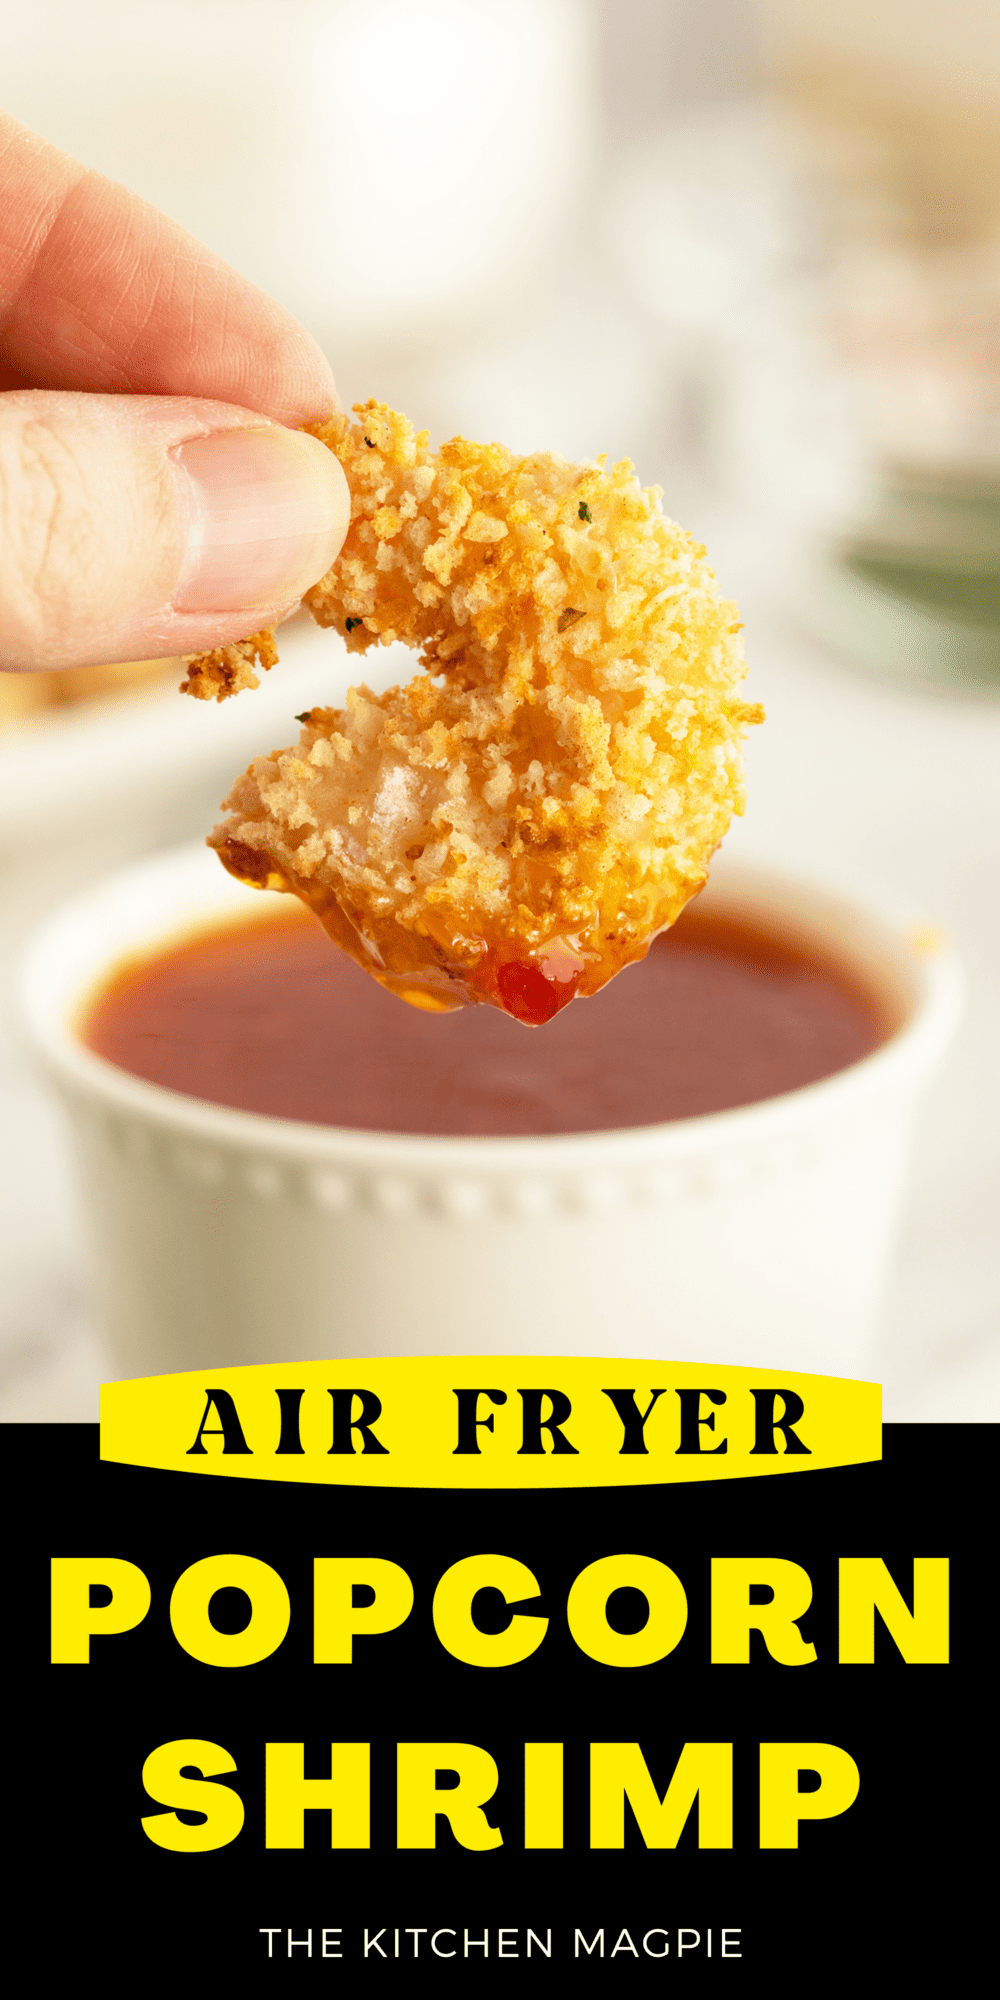 These air fryer popcorn shrimp are a snap to make with a lightly seasoned crispy coating and tender shrimp inside.